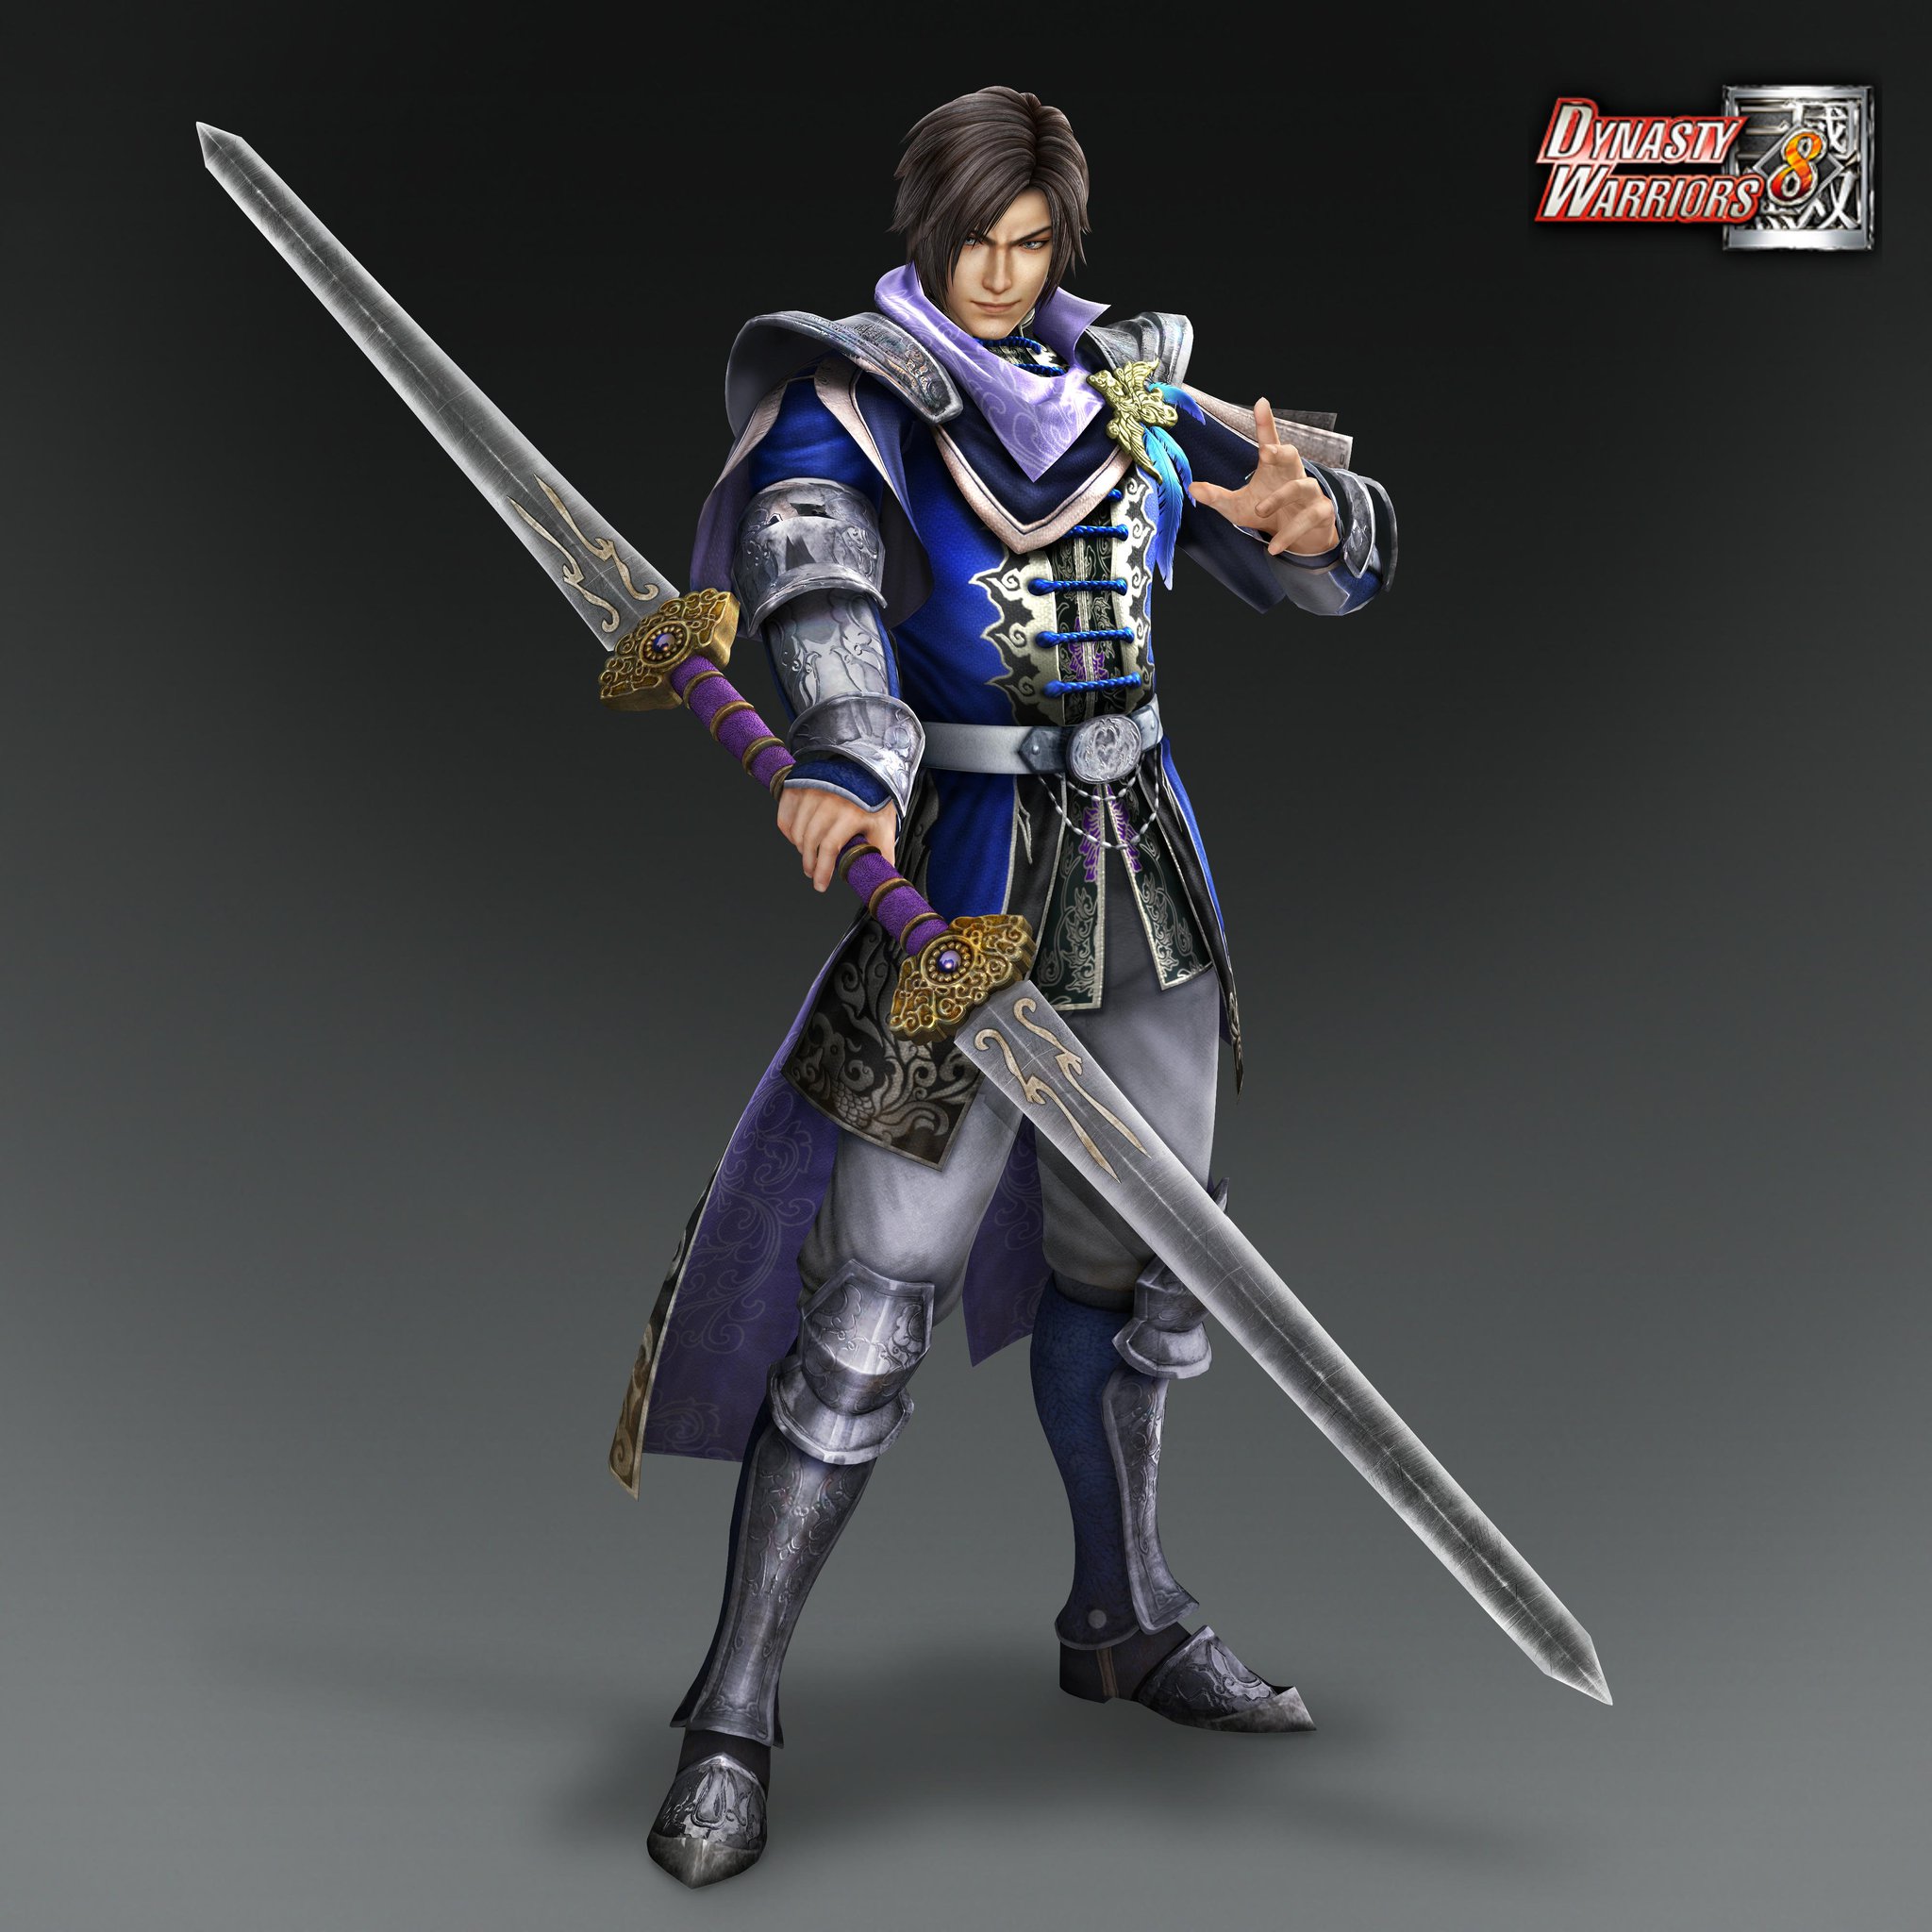 KOEI TECMO EUROPE on Twitter: "Son of Cao Cao and heir to the Wei ...